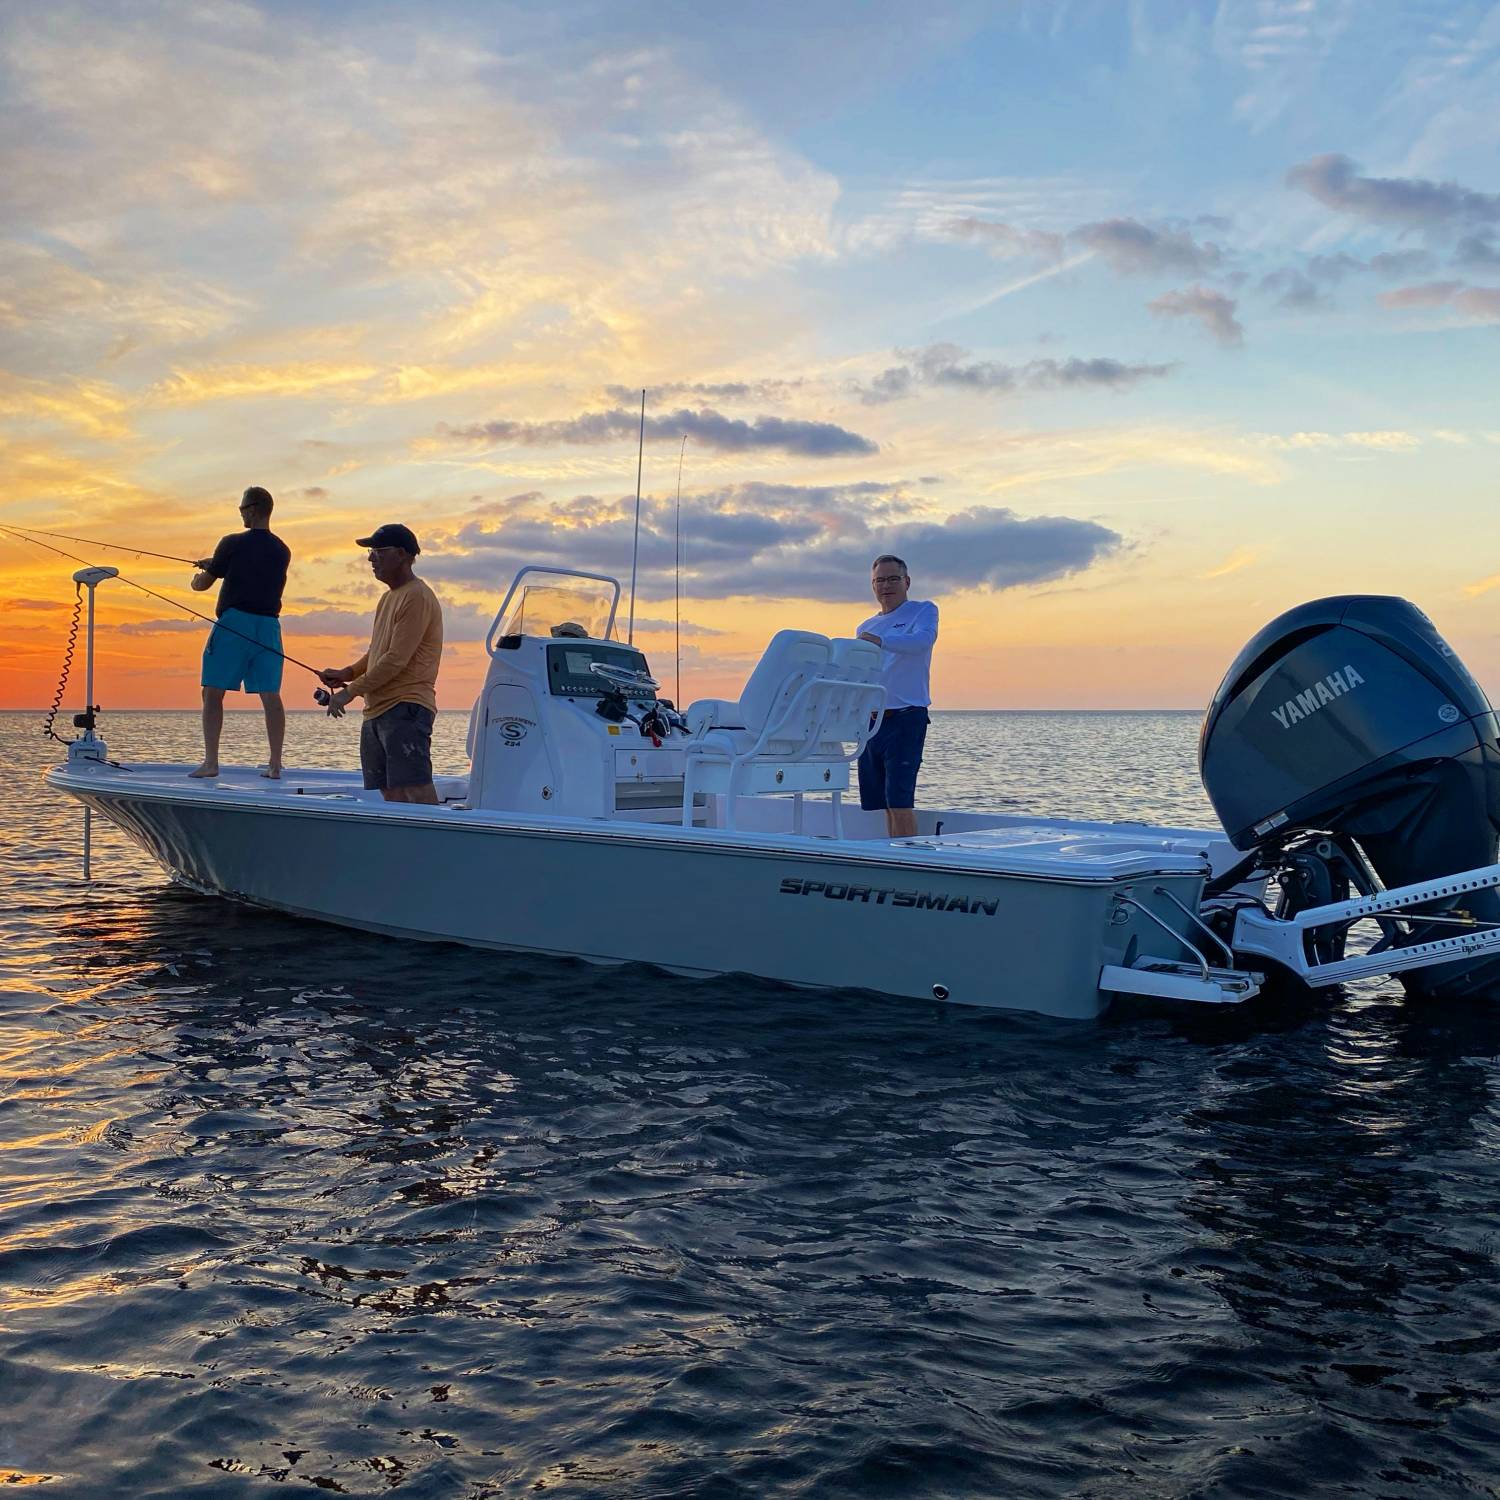 Sportsman 234T bay boat at sunset in Port Richey, FL on the grass flats with the guys.